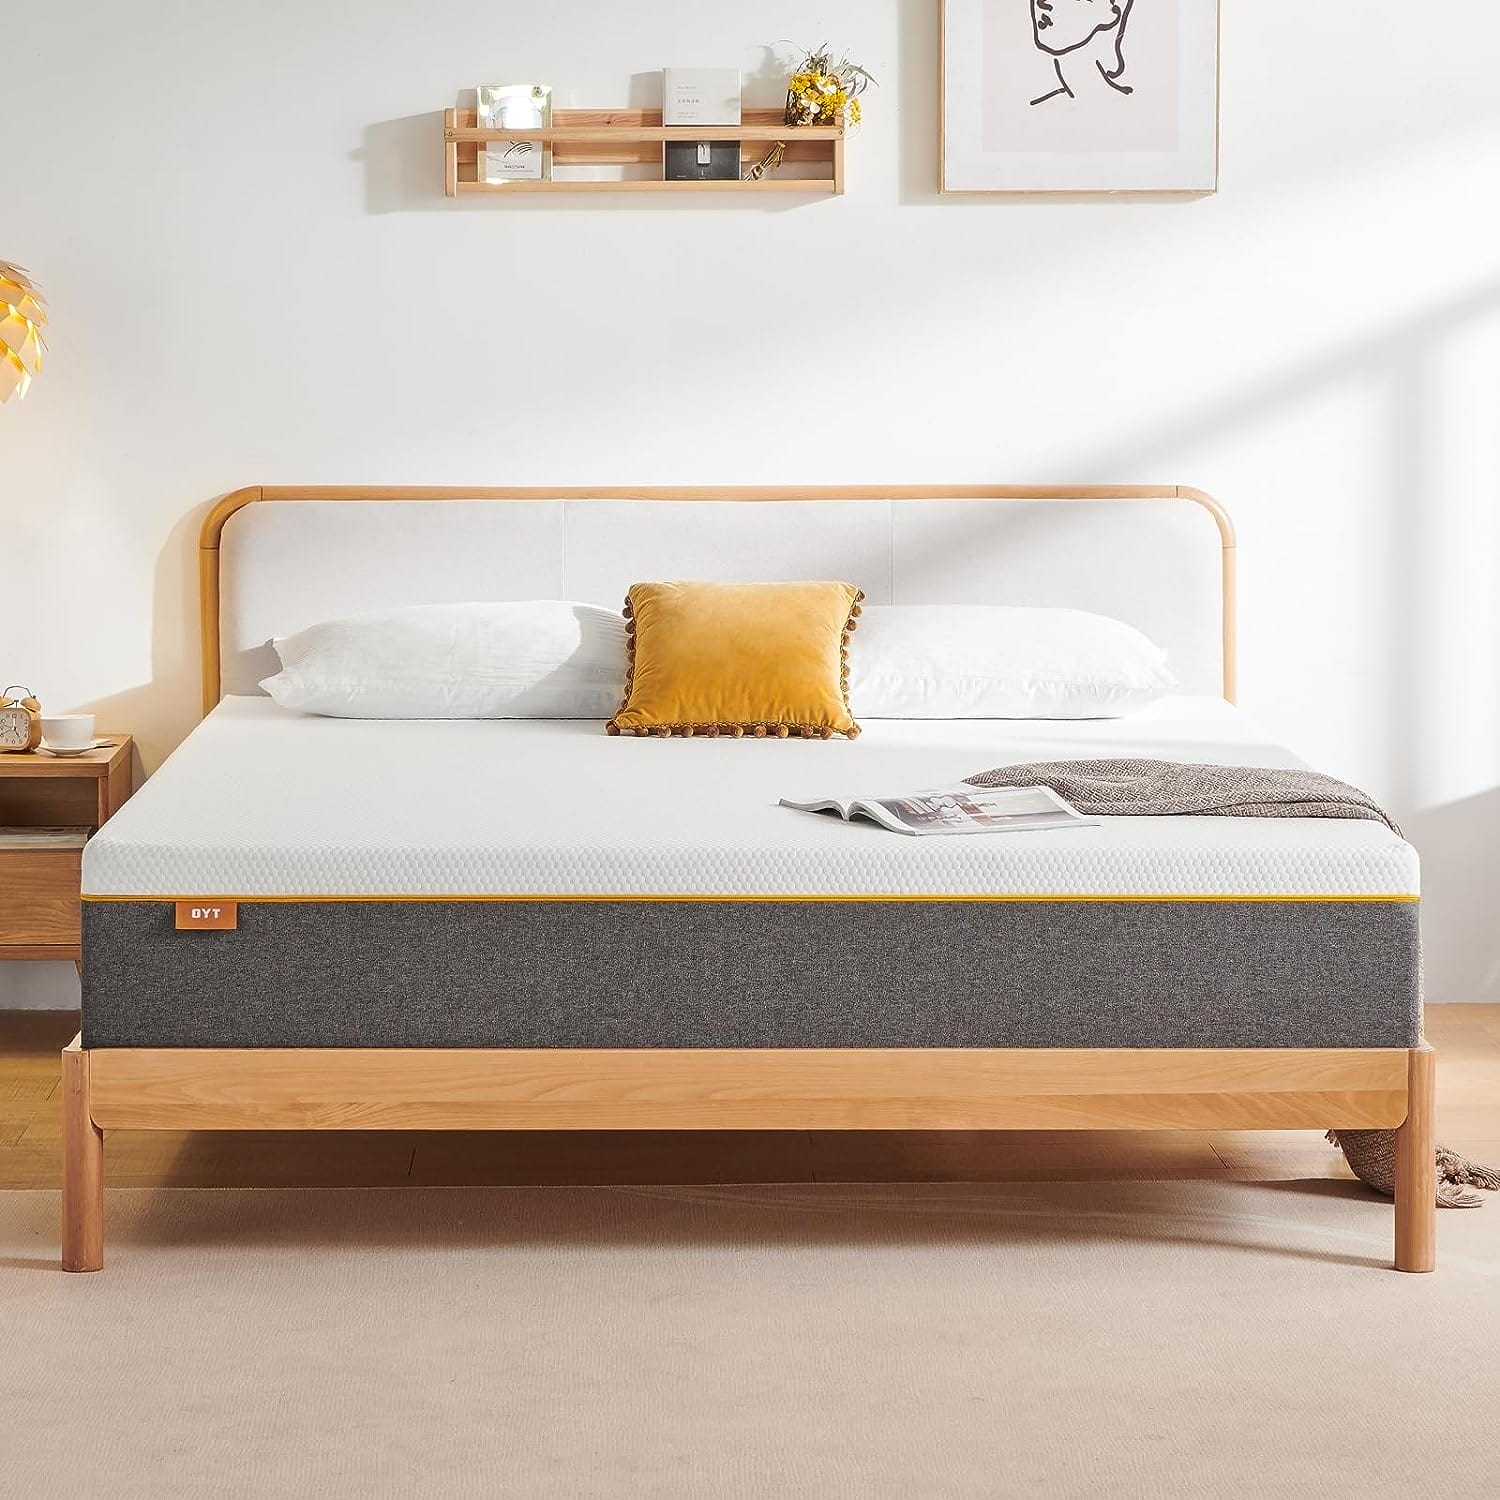 OYT Mattress Review: Unbiased Analysis and Ratings